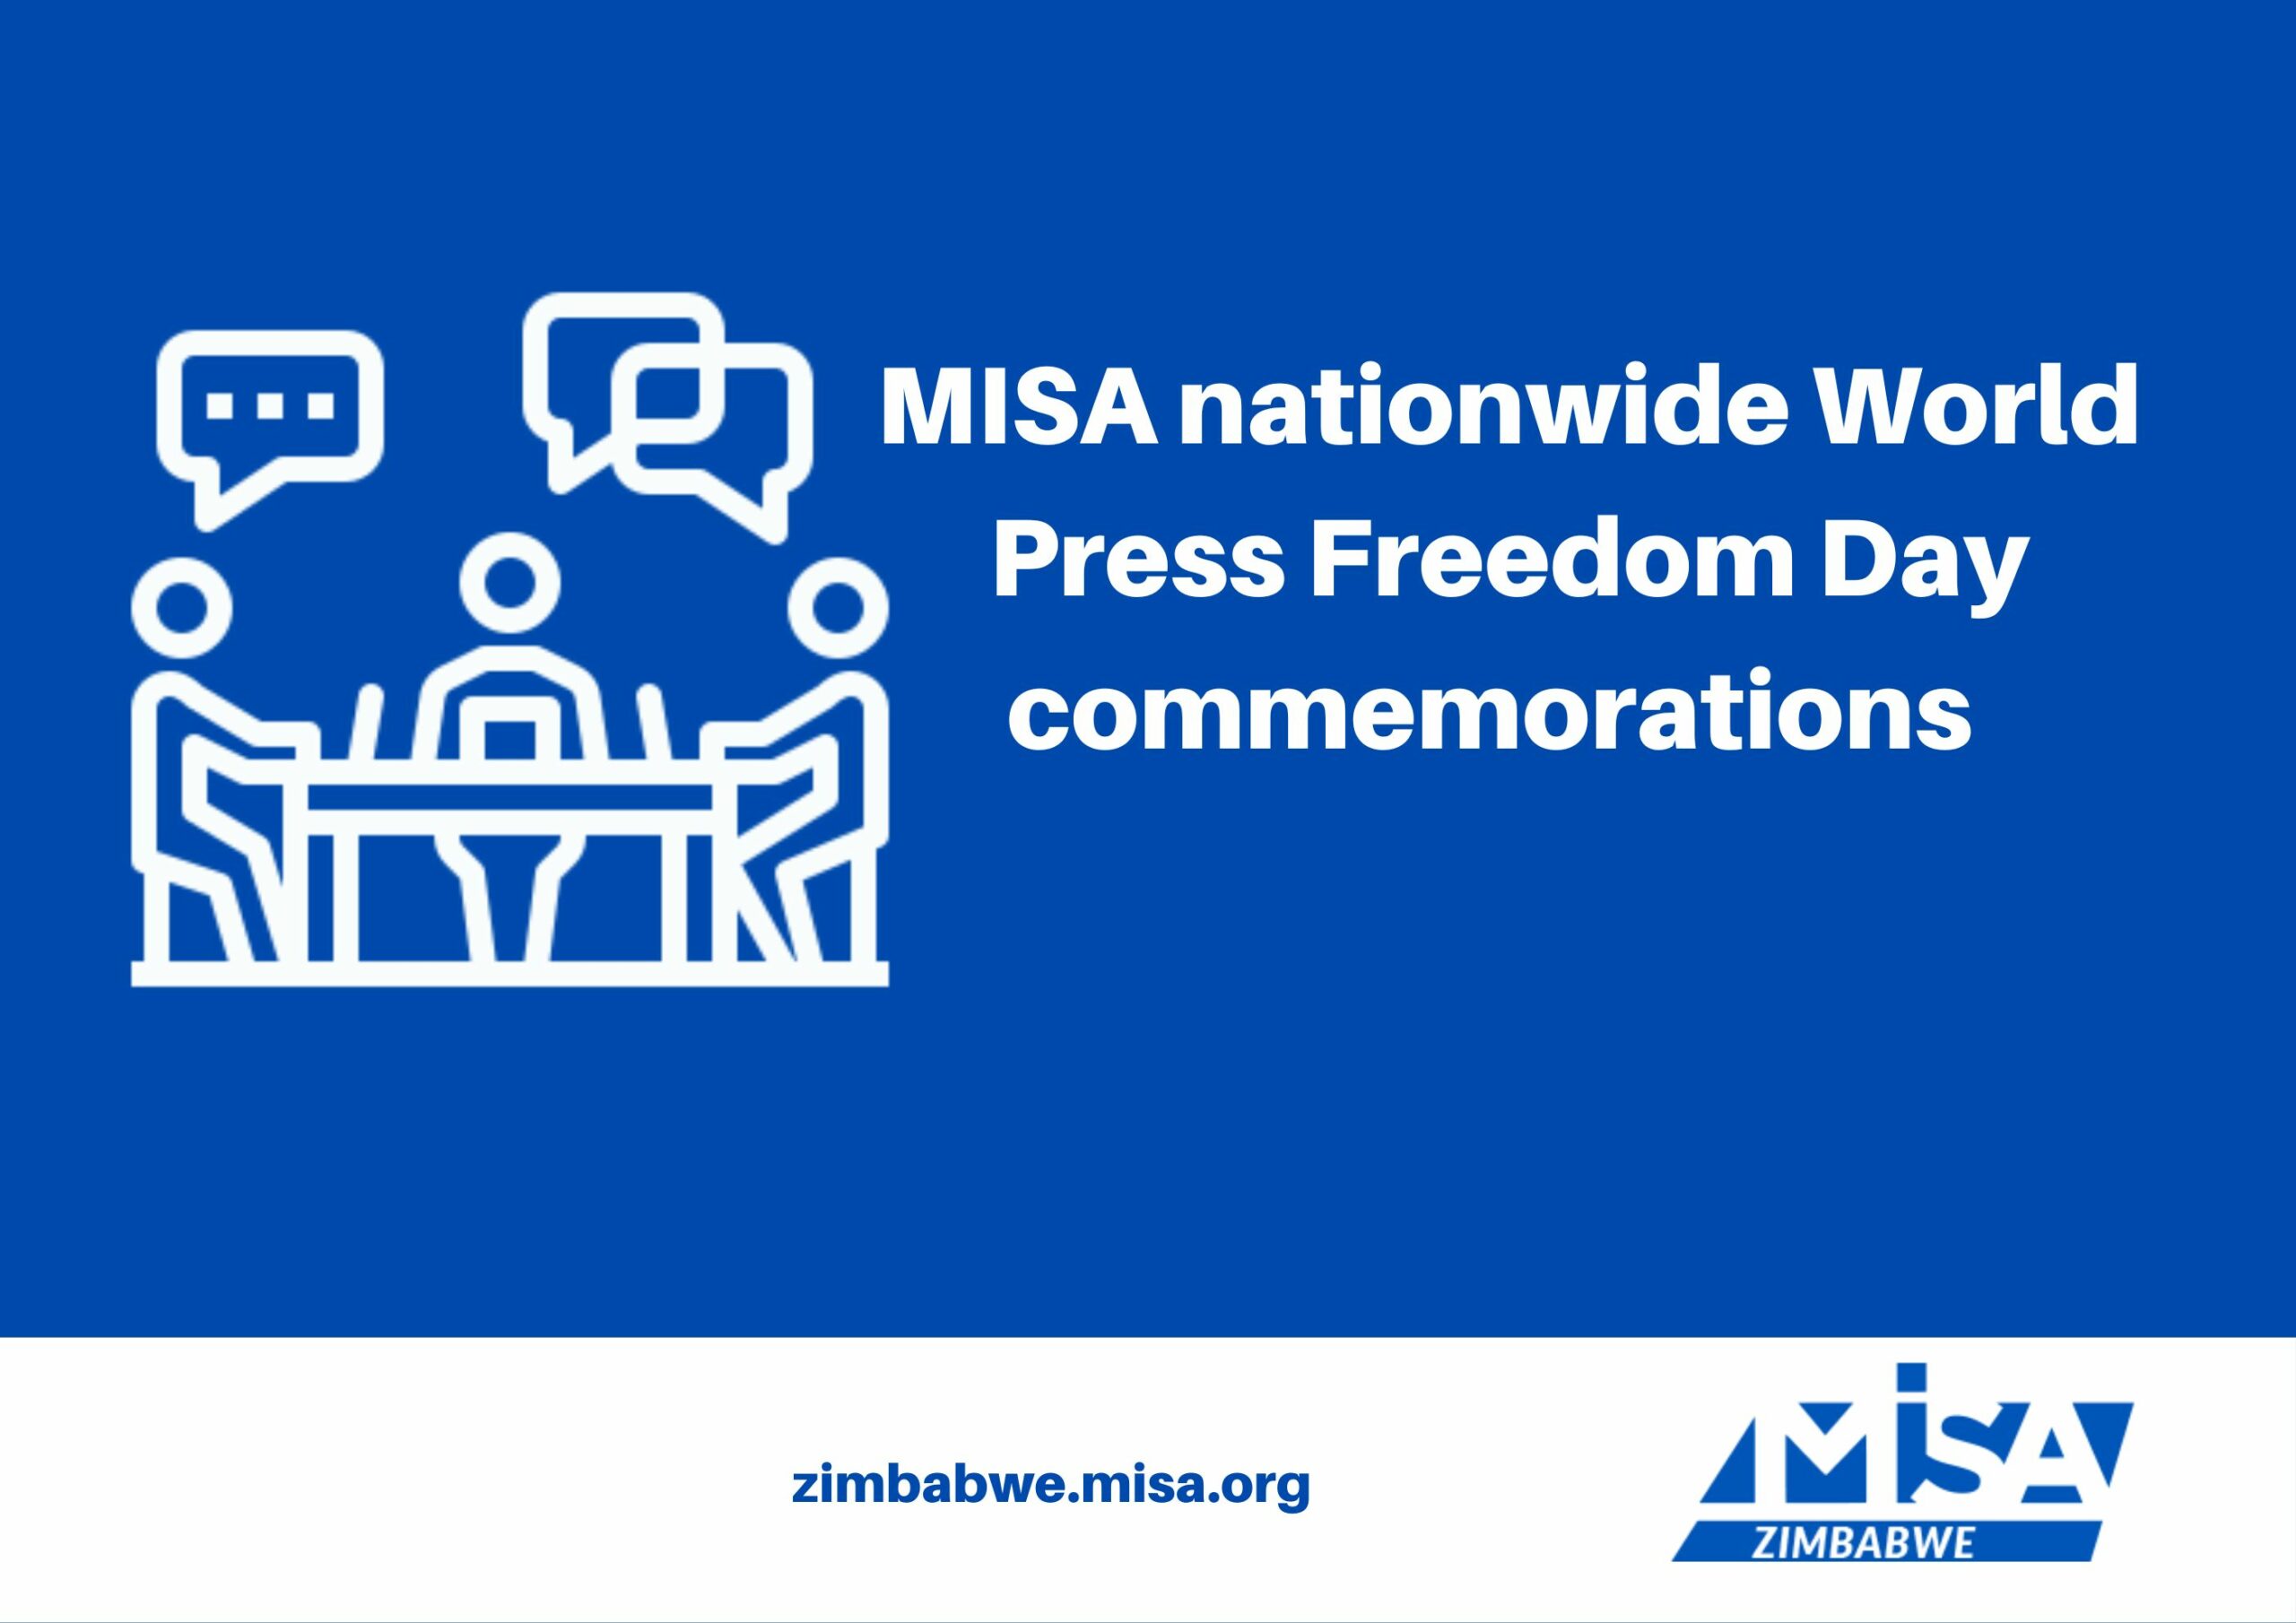 MISA nationwide World Press Freedom Day commemorations 